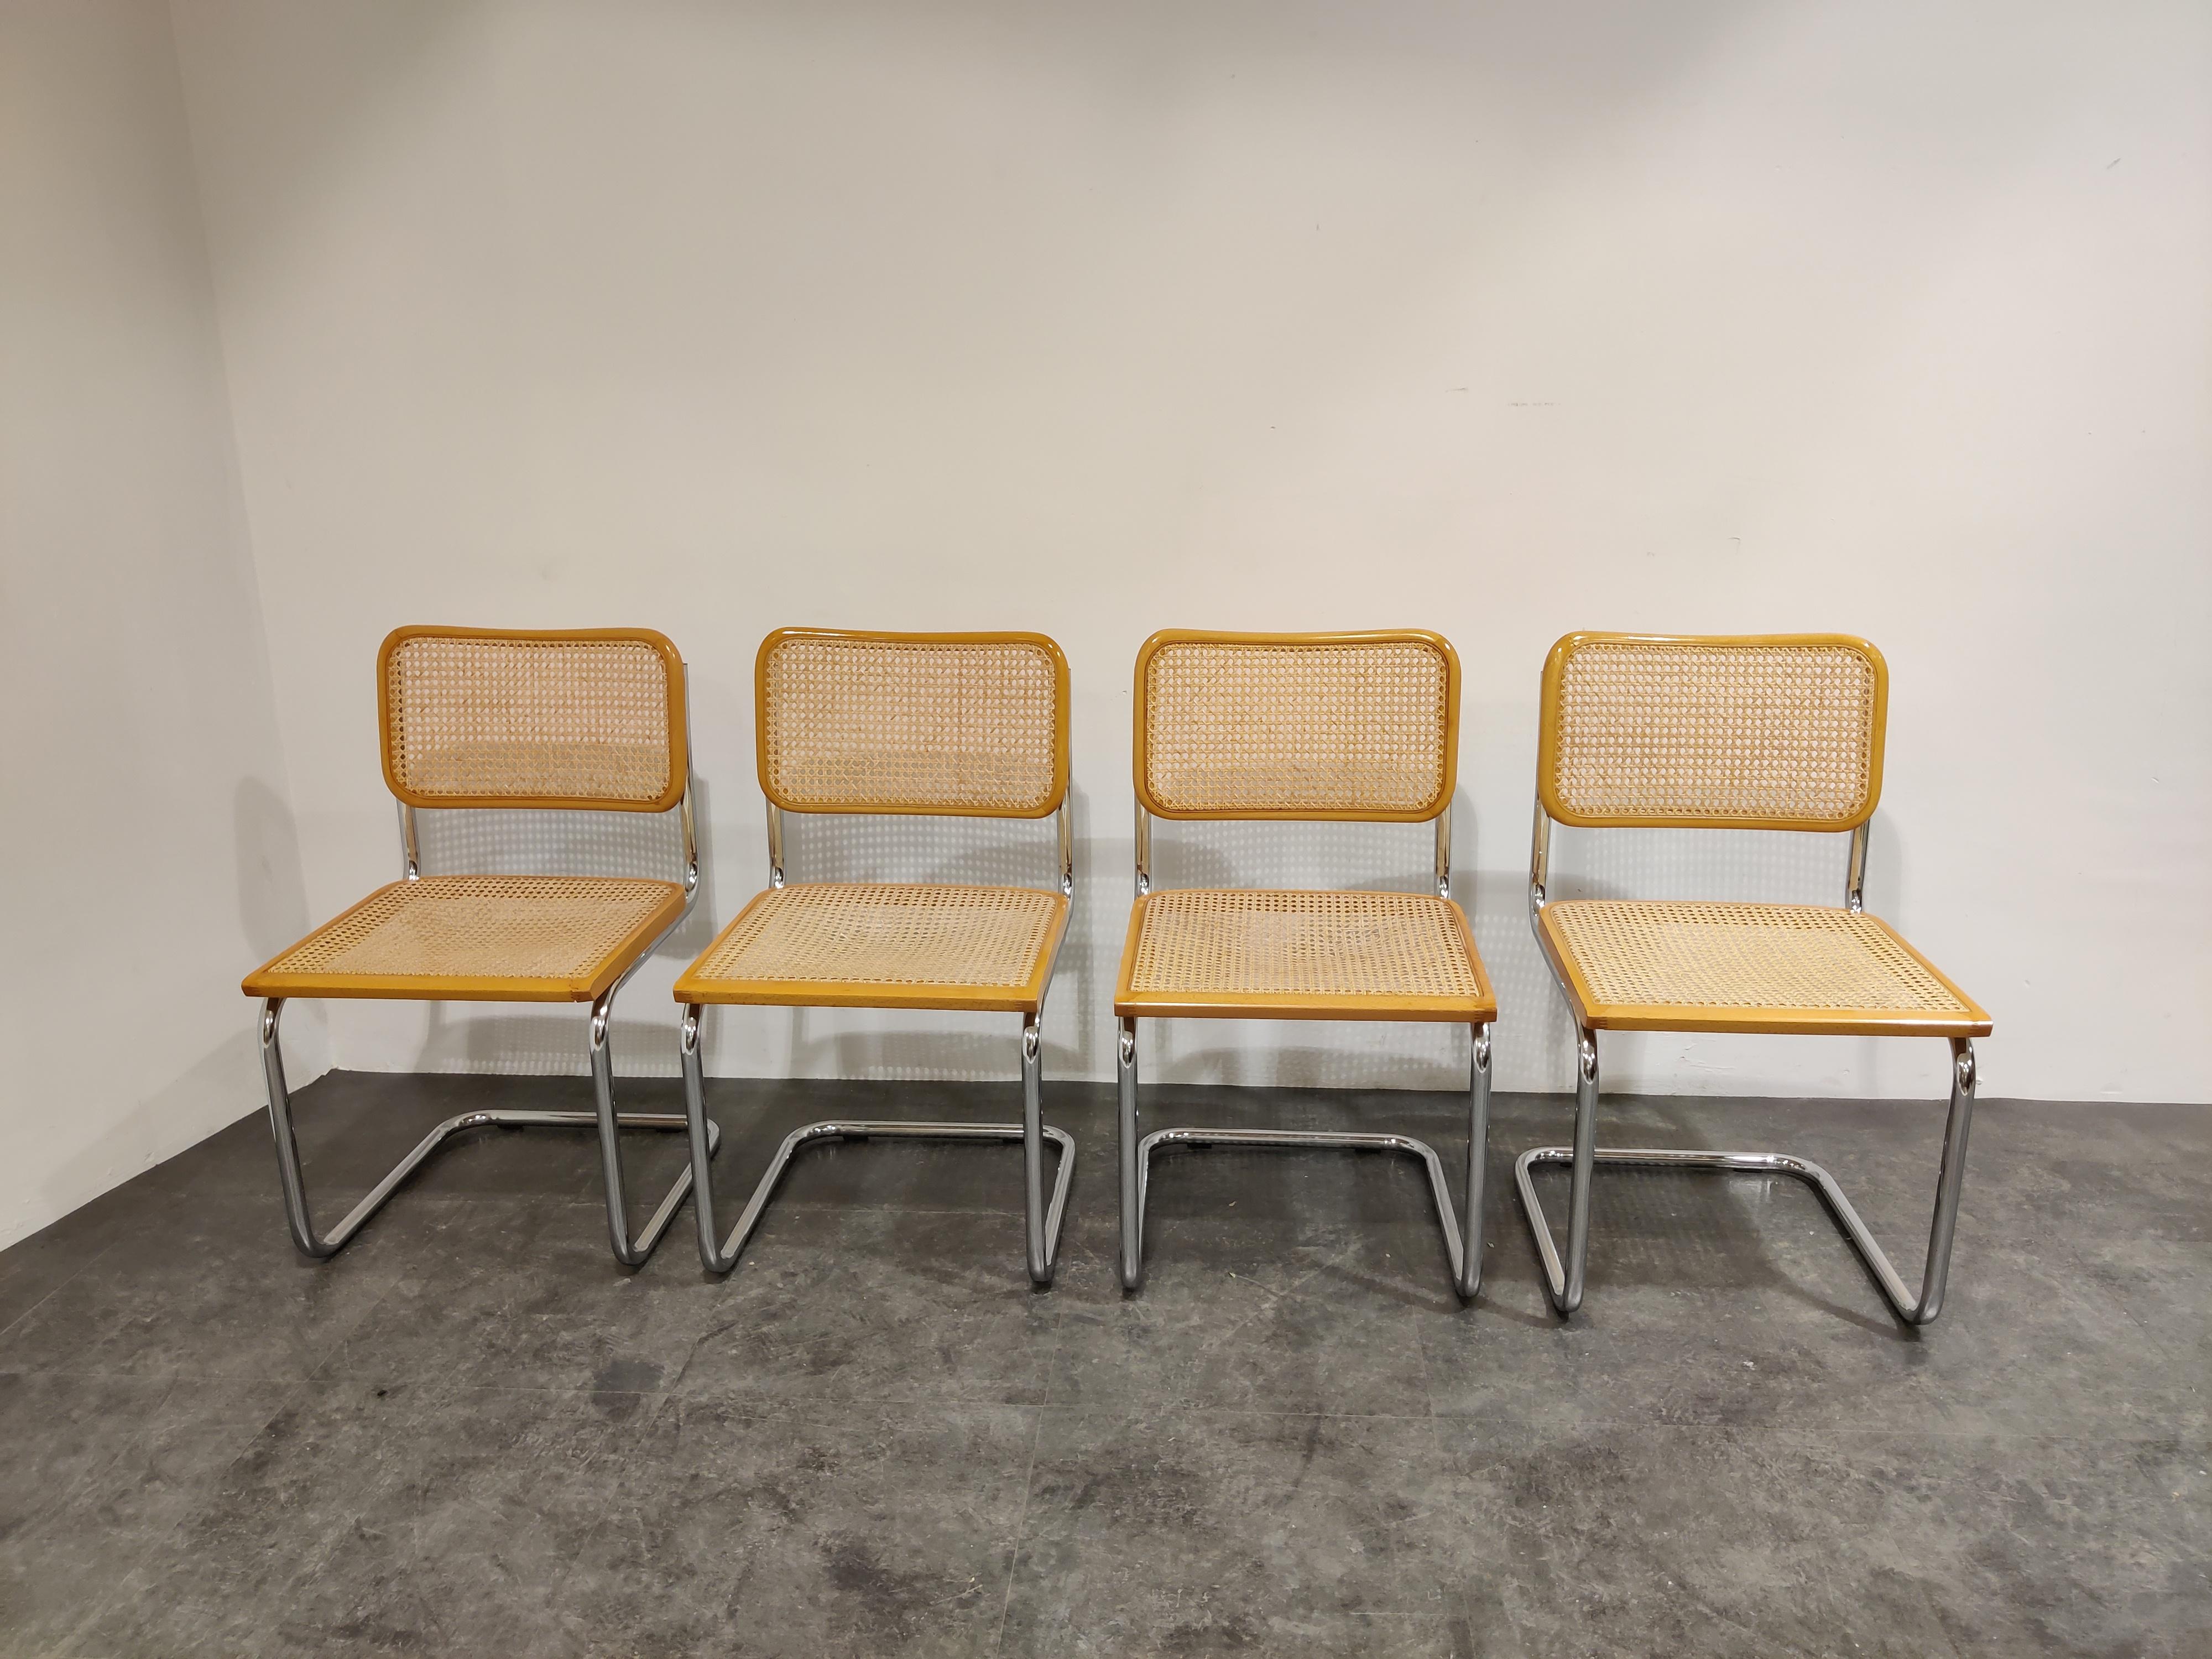 Marcel Breuer Bauhaus design chairs. 

Condition:
Chrome is good
Two seats are a bit more used but have no holes. All perfectly usable as they are. 

The chairs are very popular for modern day interiors yet the original design dates back to